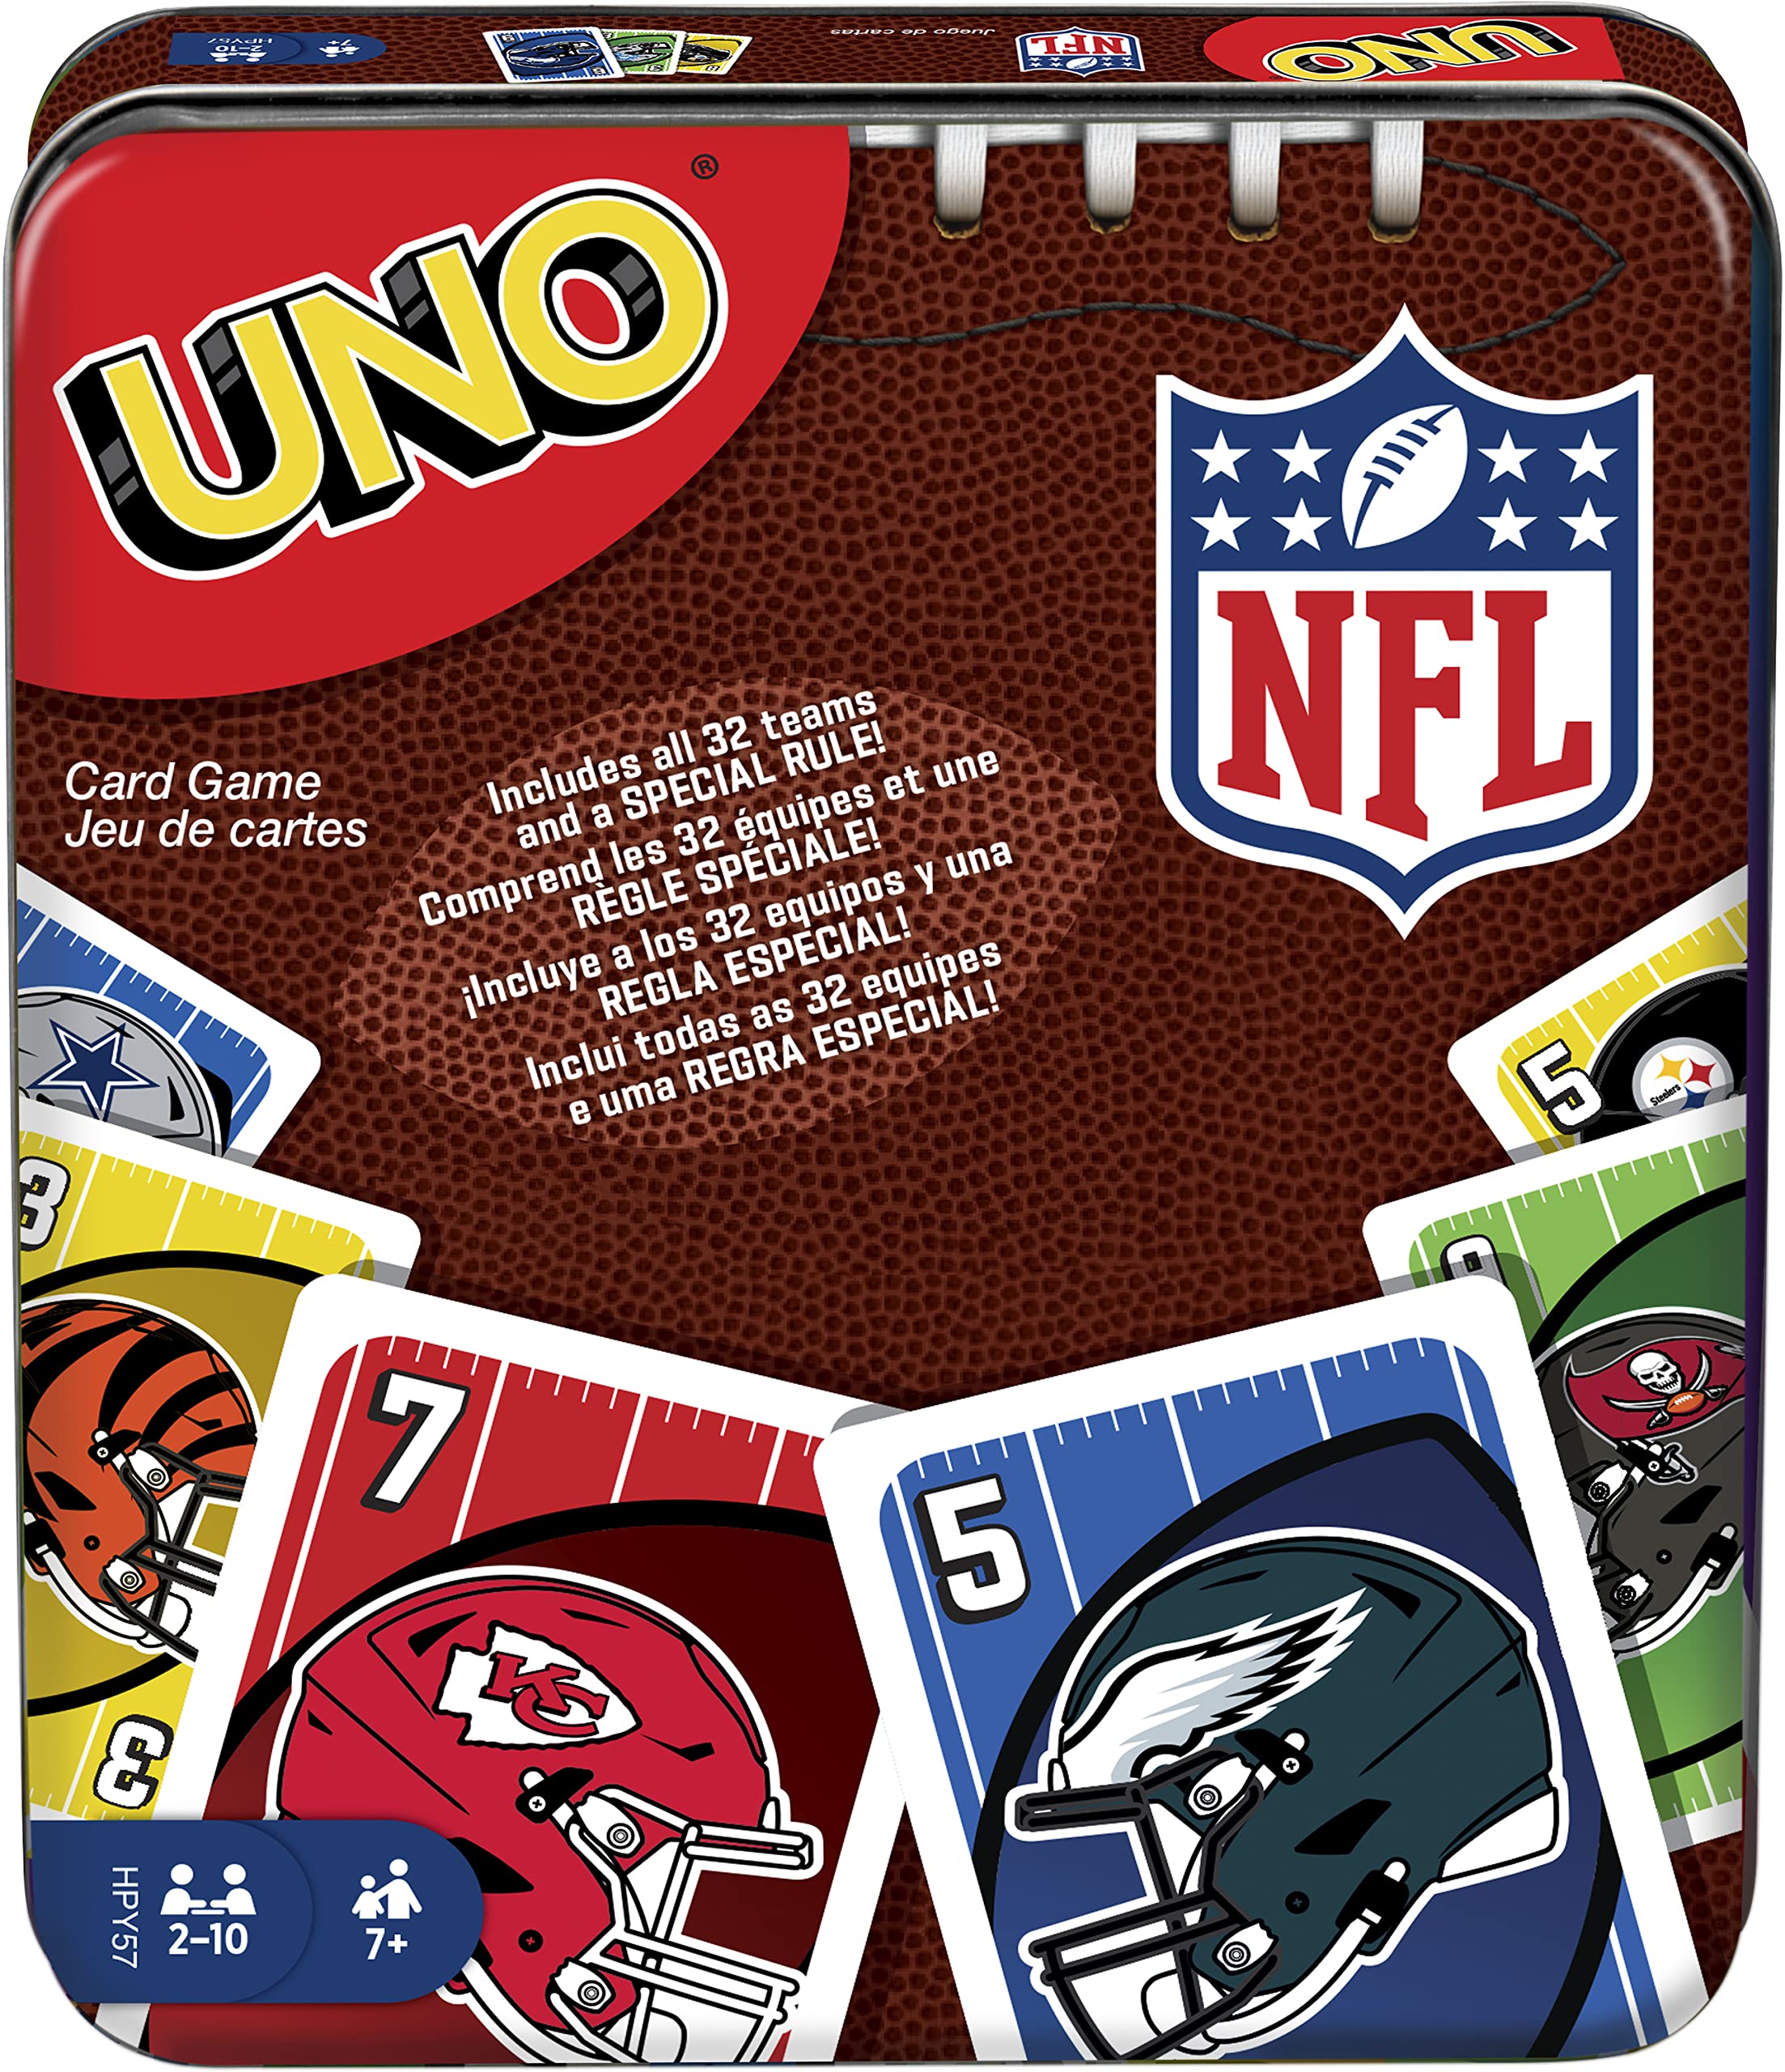 Mattel Games UNO NFL Card Game for Kids & Adults, Travel Game with NFL Team Logos & Special Rule in Storage Tin Box